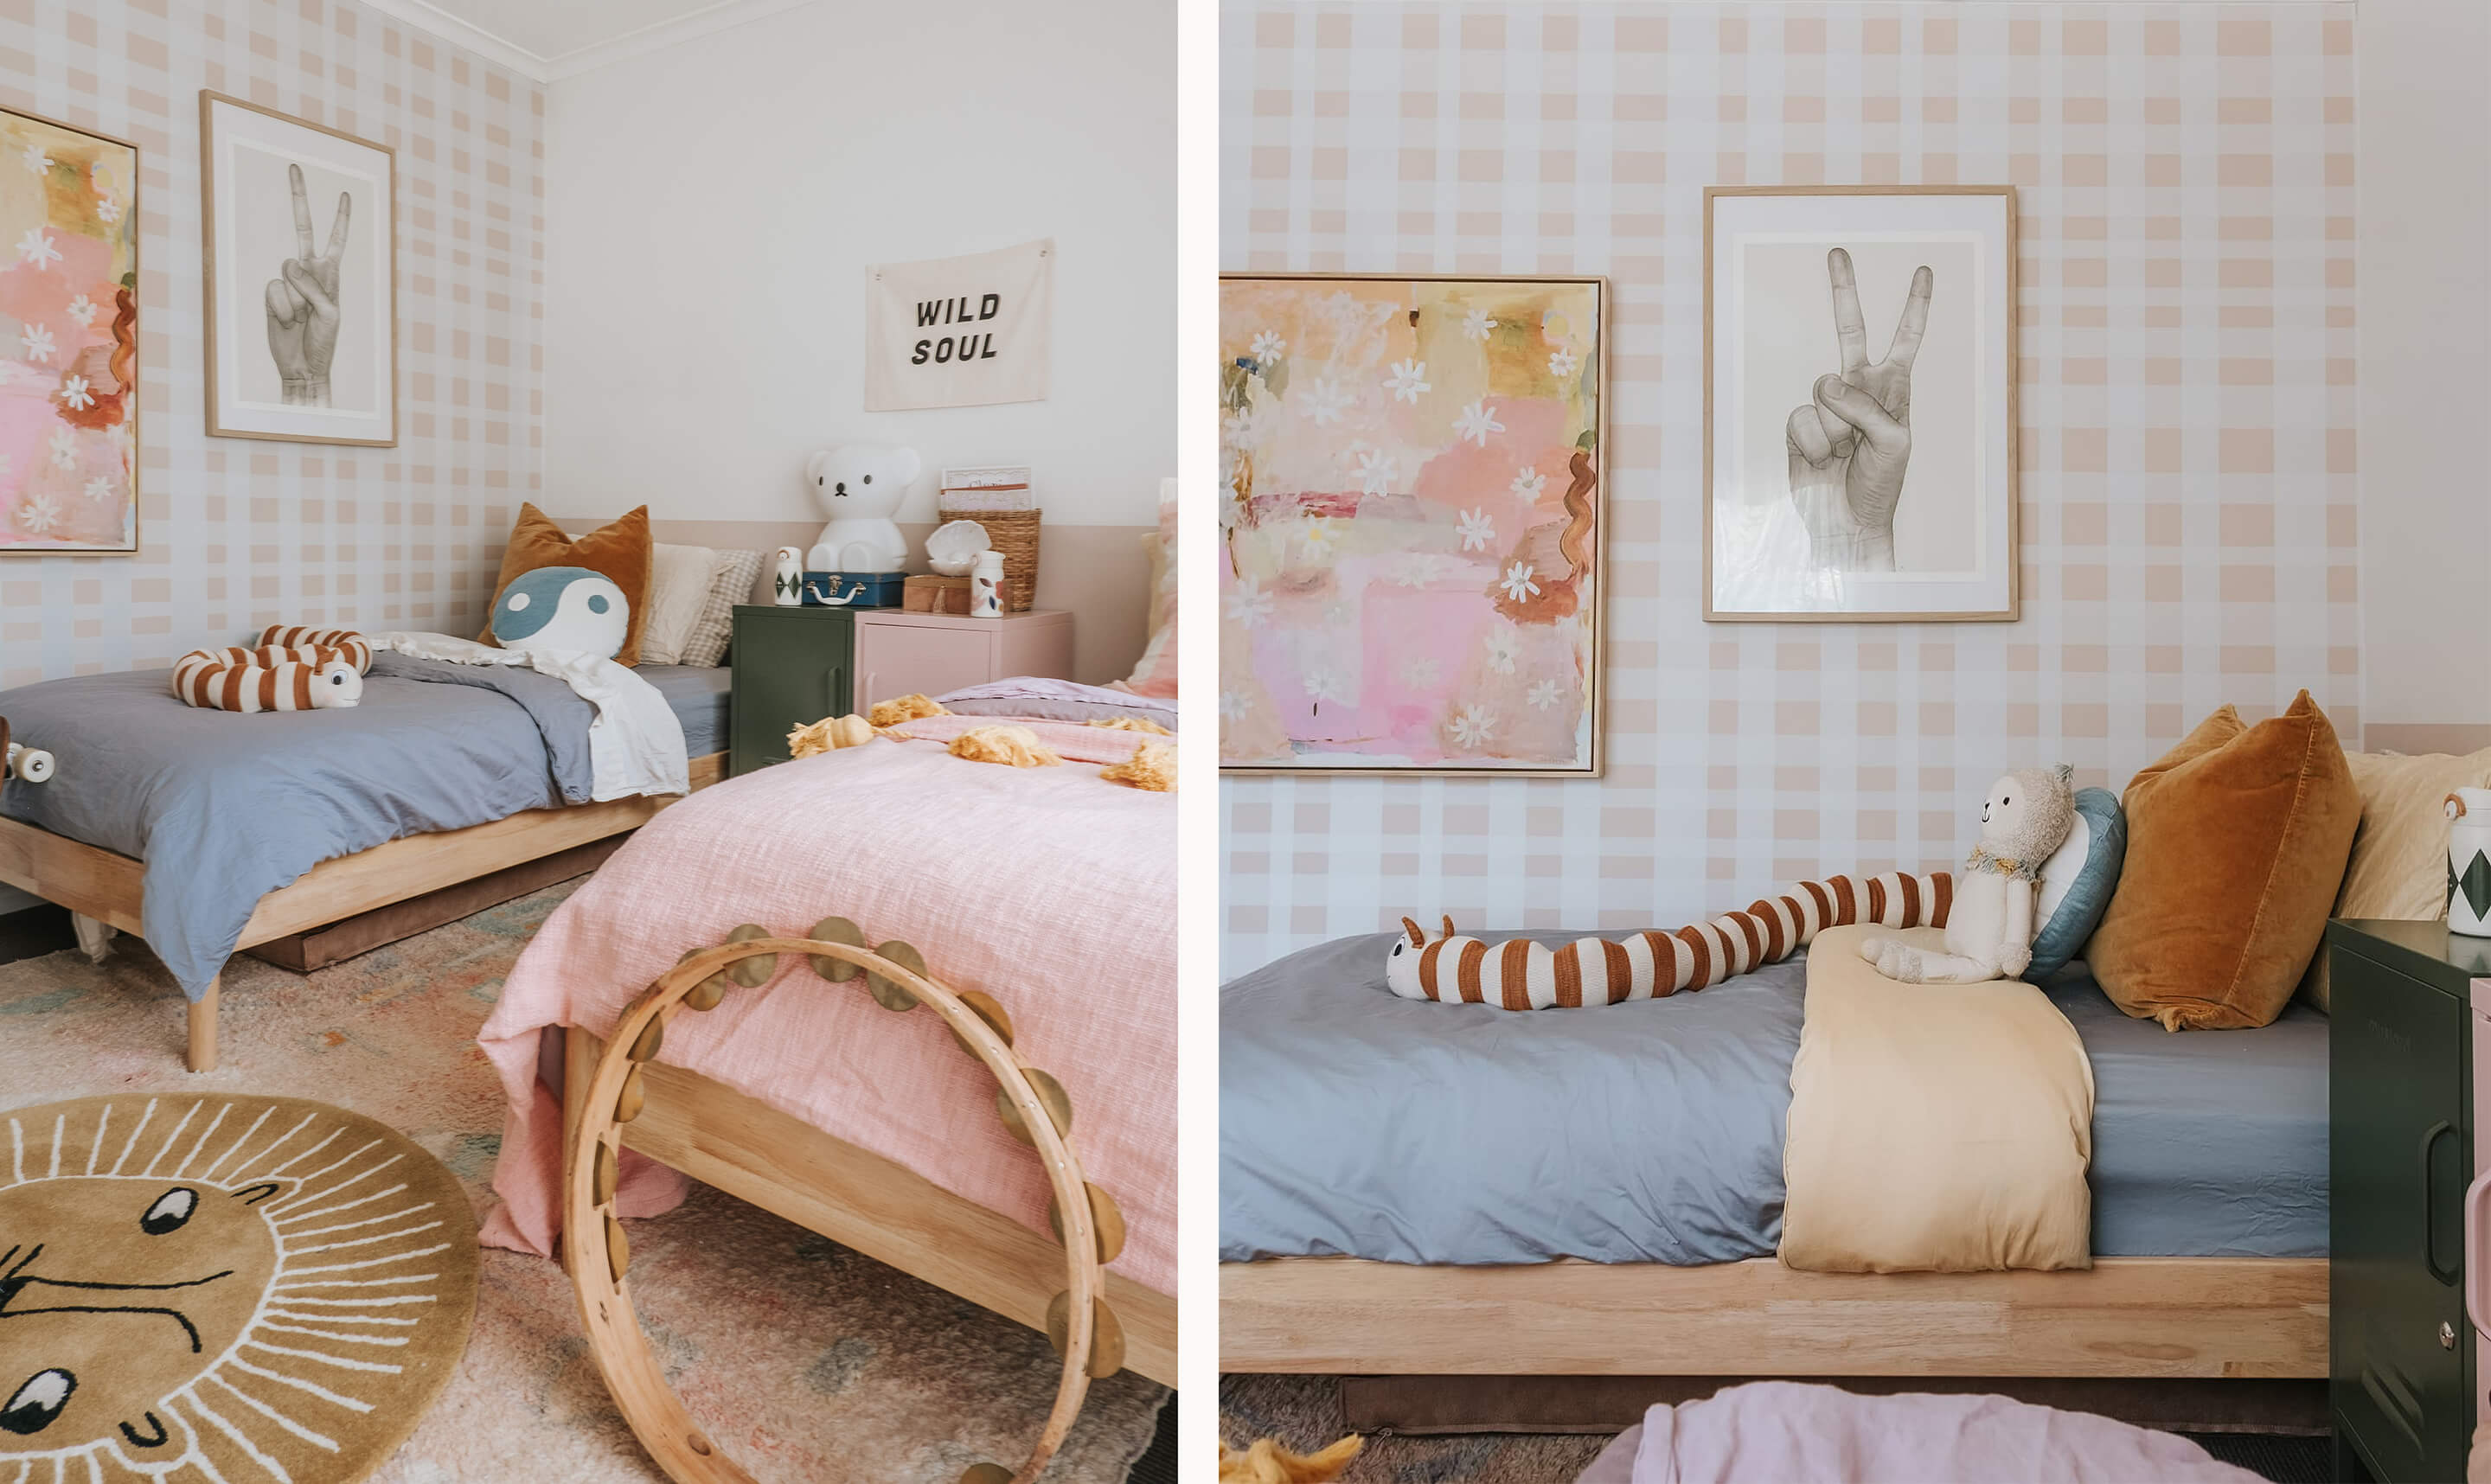 Our Luna Single Bed Frames as styled by Raffaela Sofia in this fun and stylish kids bedroom, shop in-store or online now!